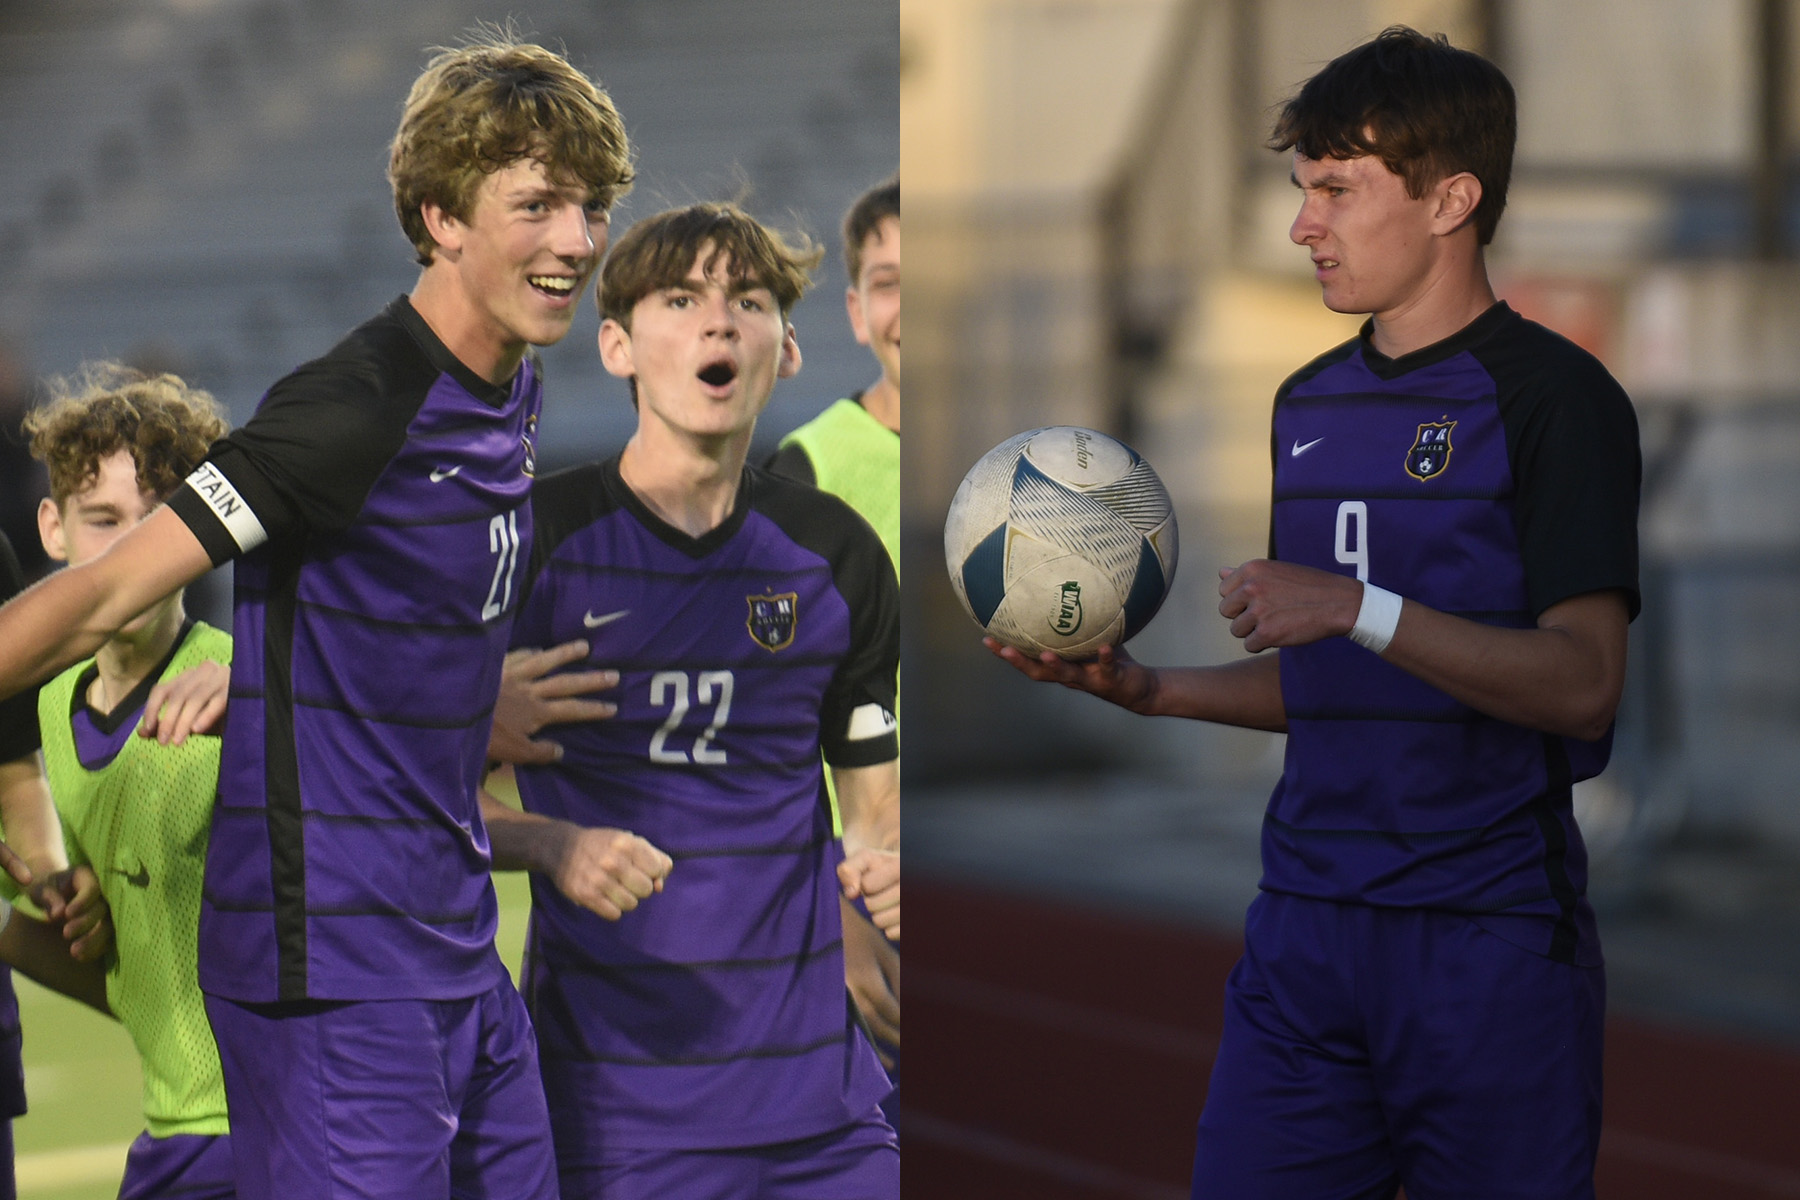 Columbia River soccer players Cole Benner (left) and Alex Harris (right) had a busy day Friday, playing two matches of tennis in the morning and finishing with a state soccer semifinal win.